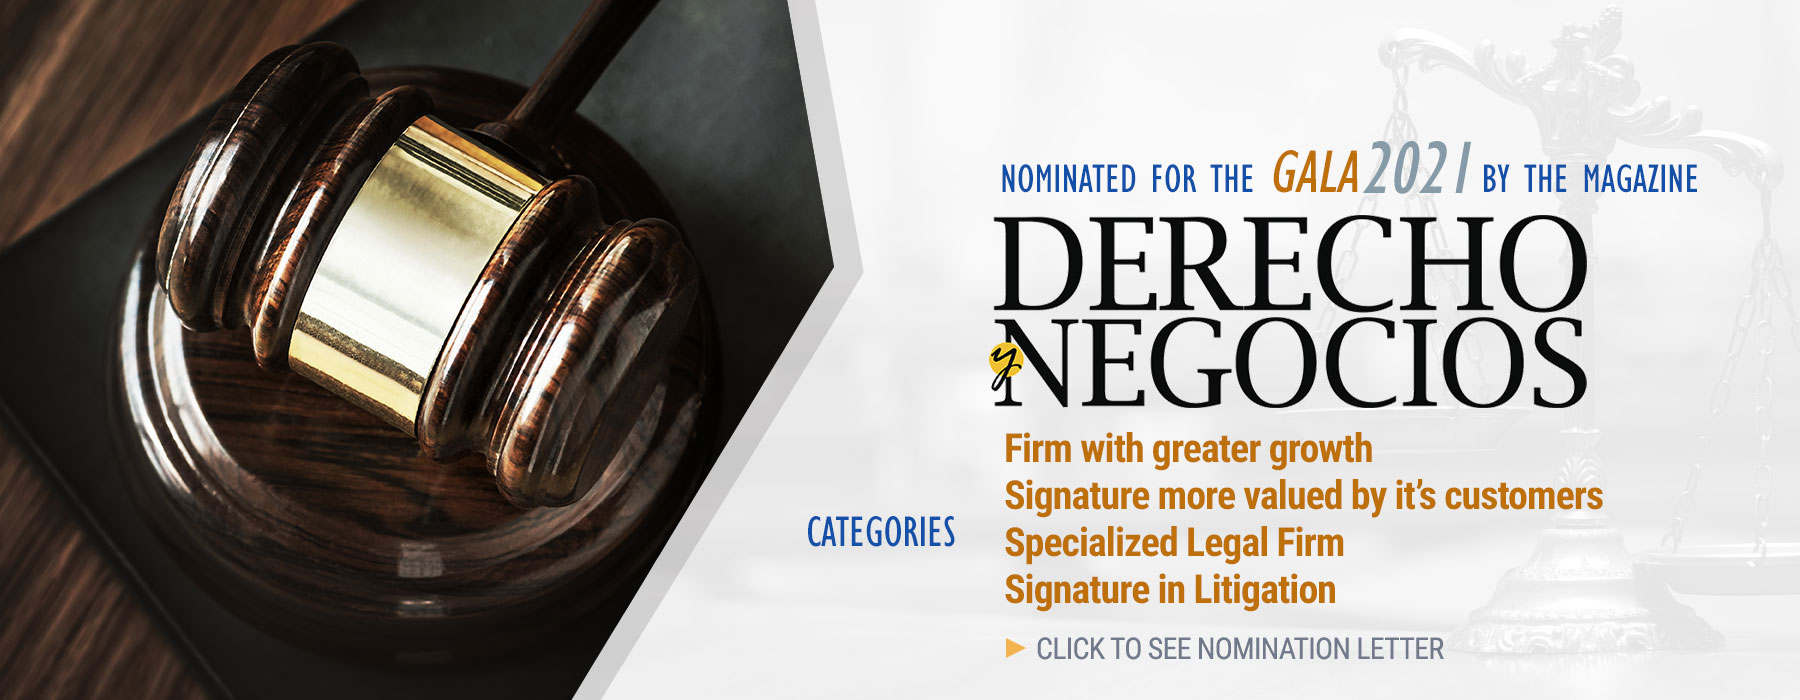 Nominated for the Gala 2021 by the magazine Derecho y Negocios